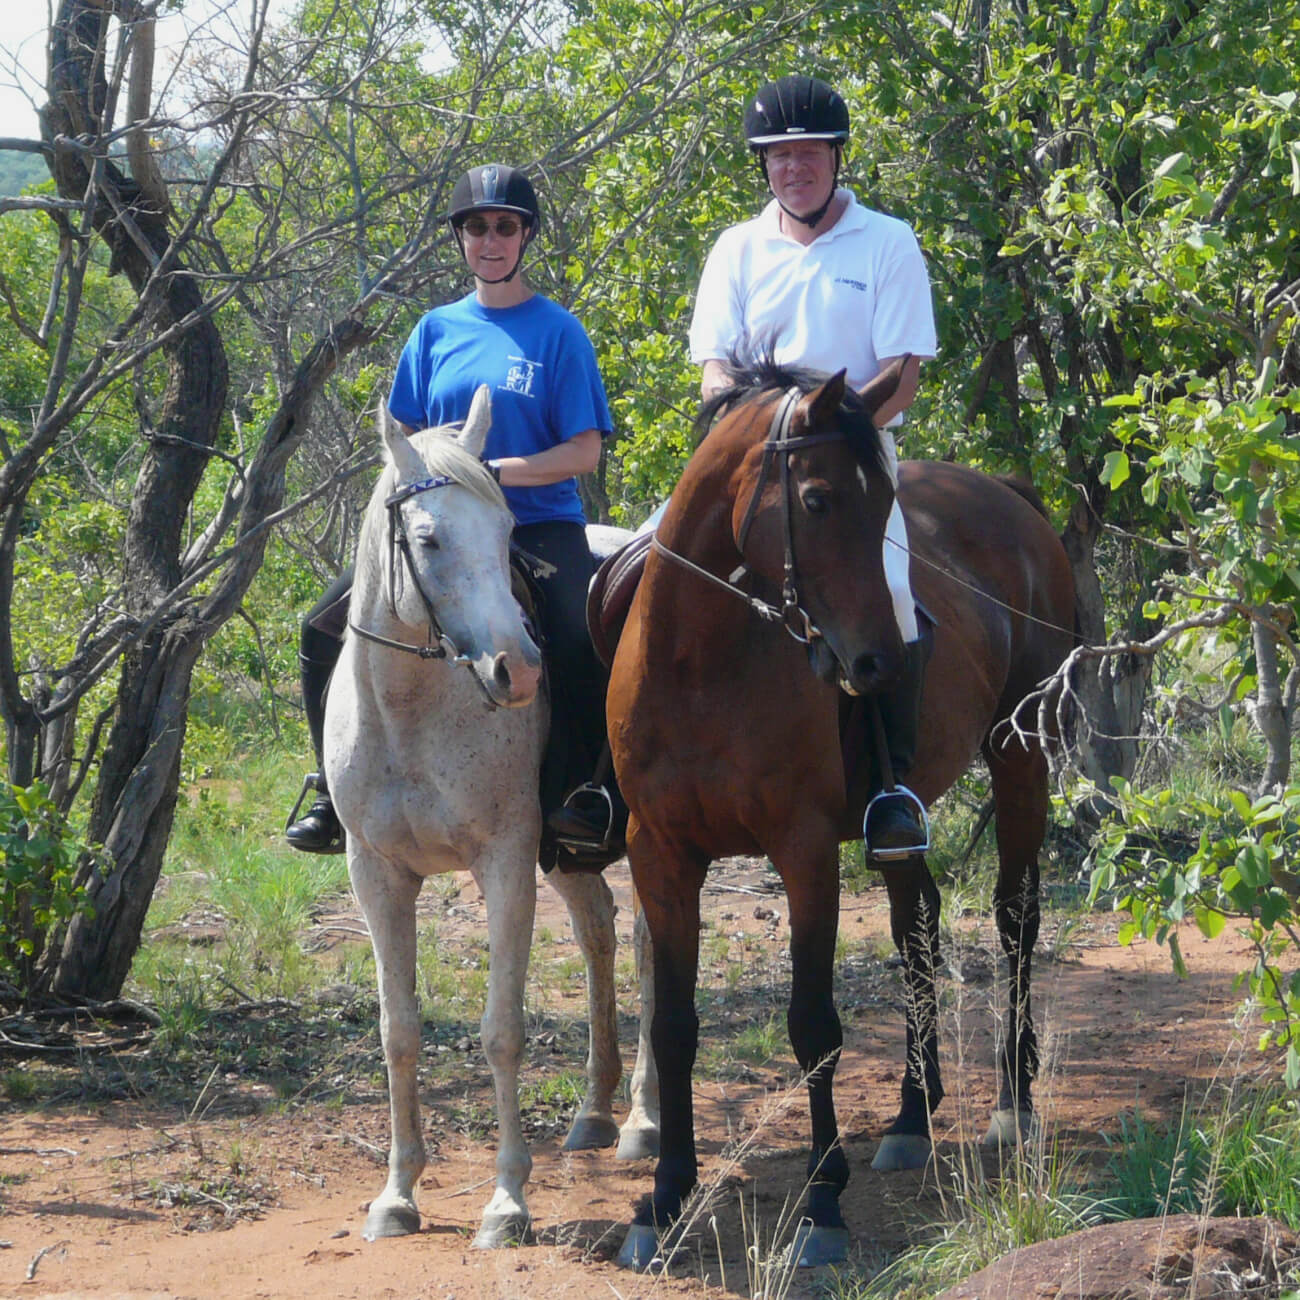 Brenda and John pause sitting atop their horses on a trail